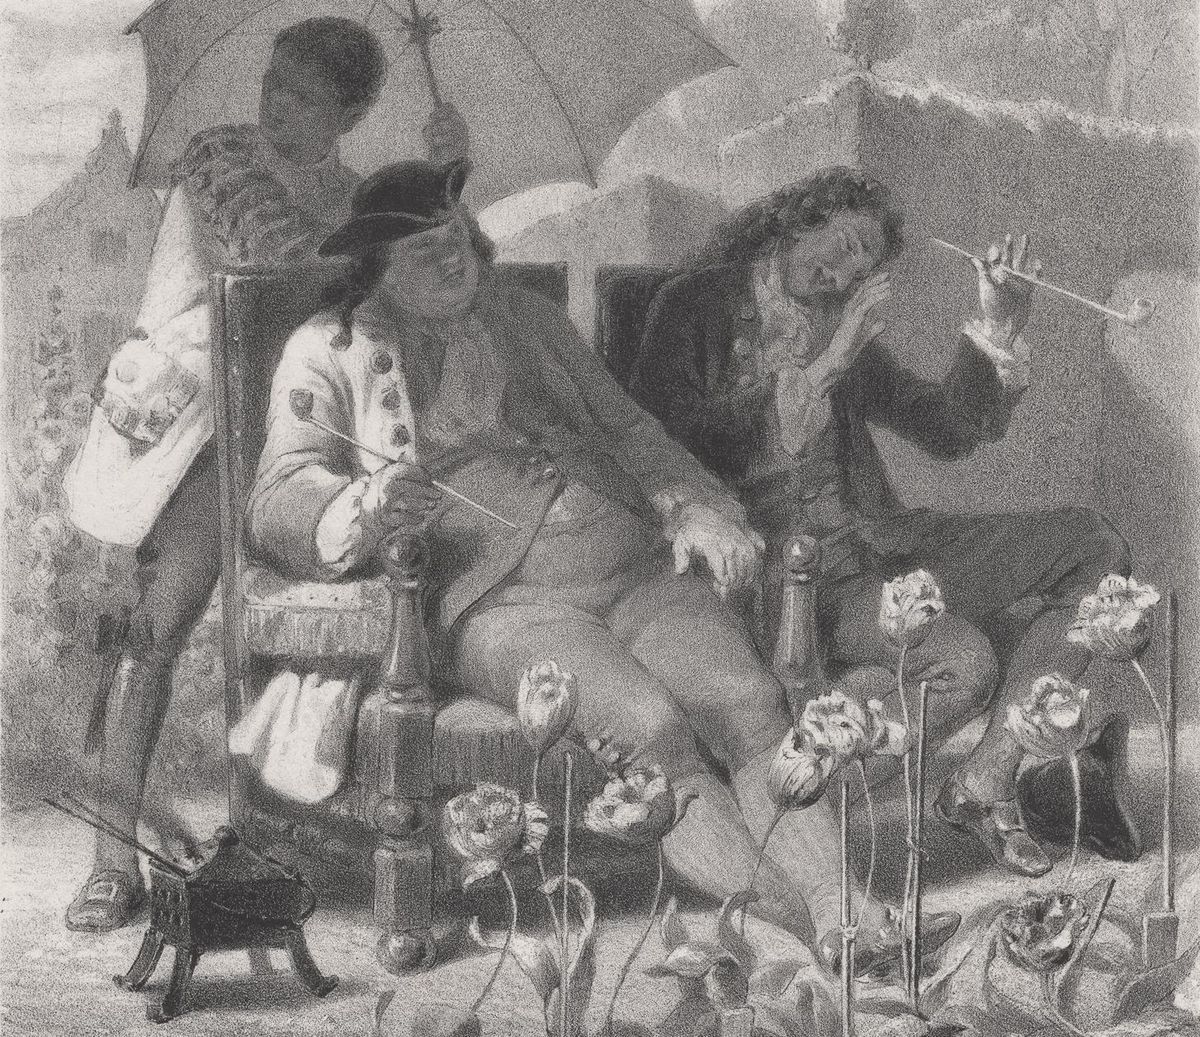 This image shows a lithograph after a painting that depicts two seated men with a servant holding an umbrella shading them from the sun while they are admiring a bed of tulips.